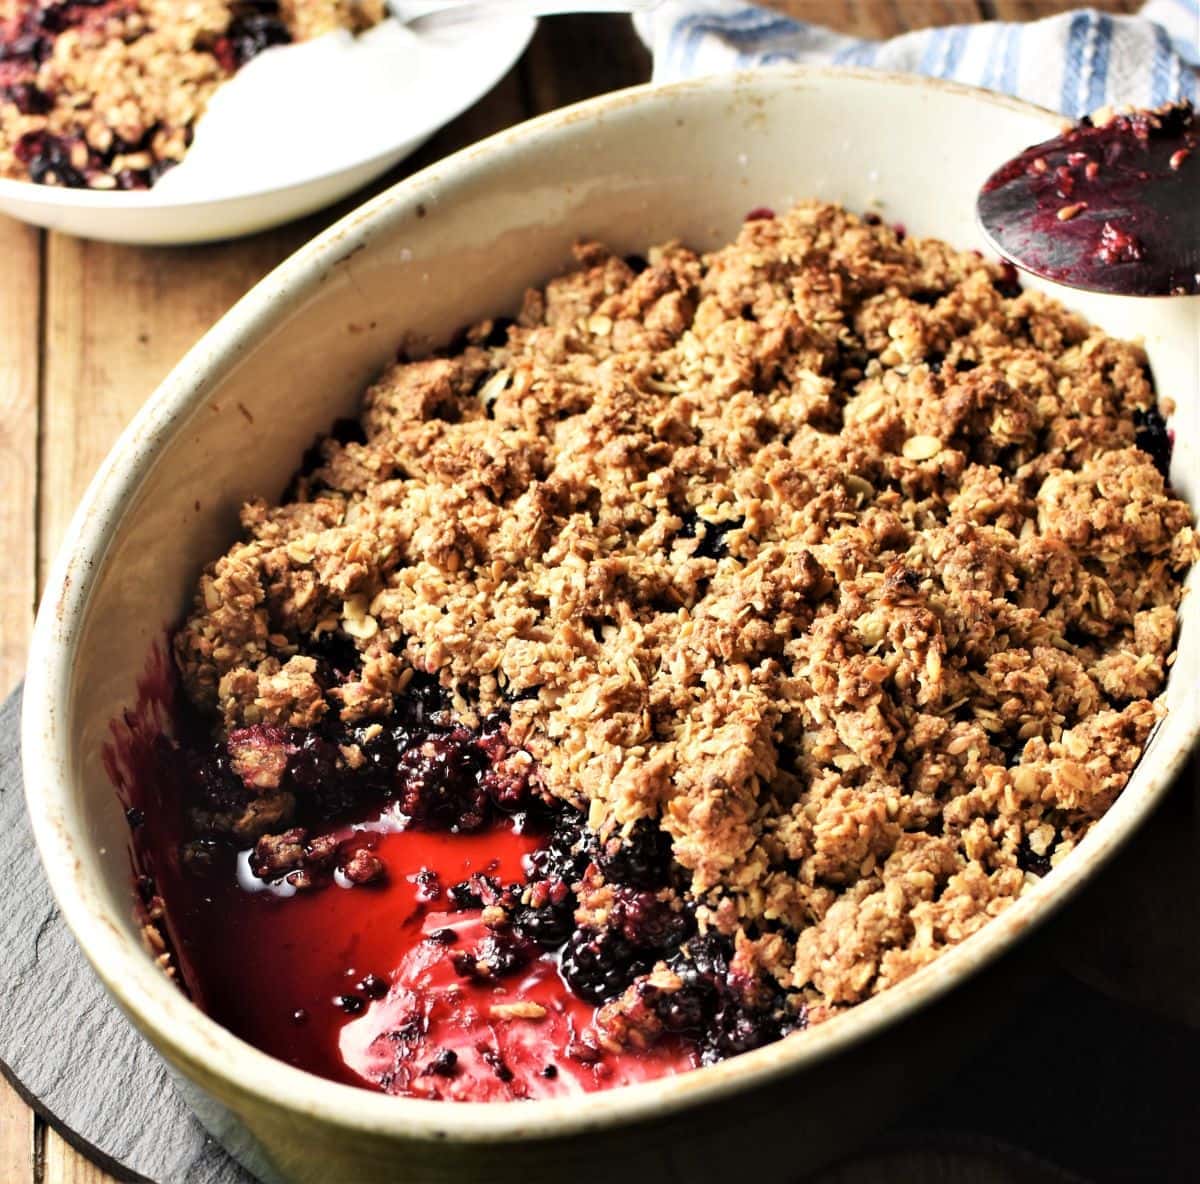 Side view of blackberry crumble in white oval dish.